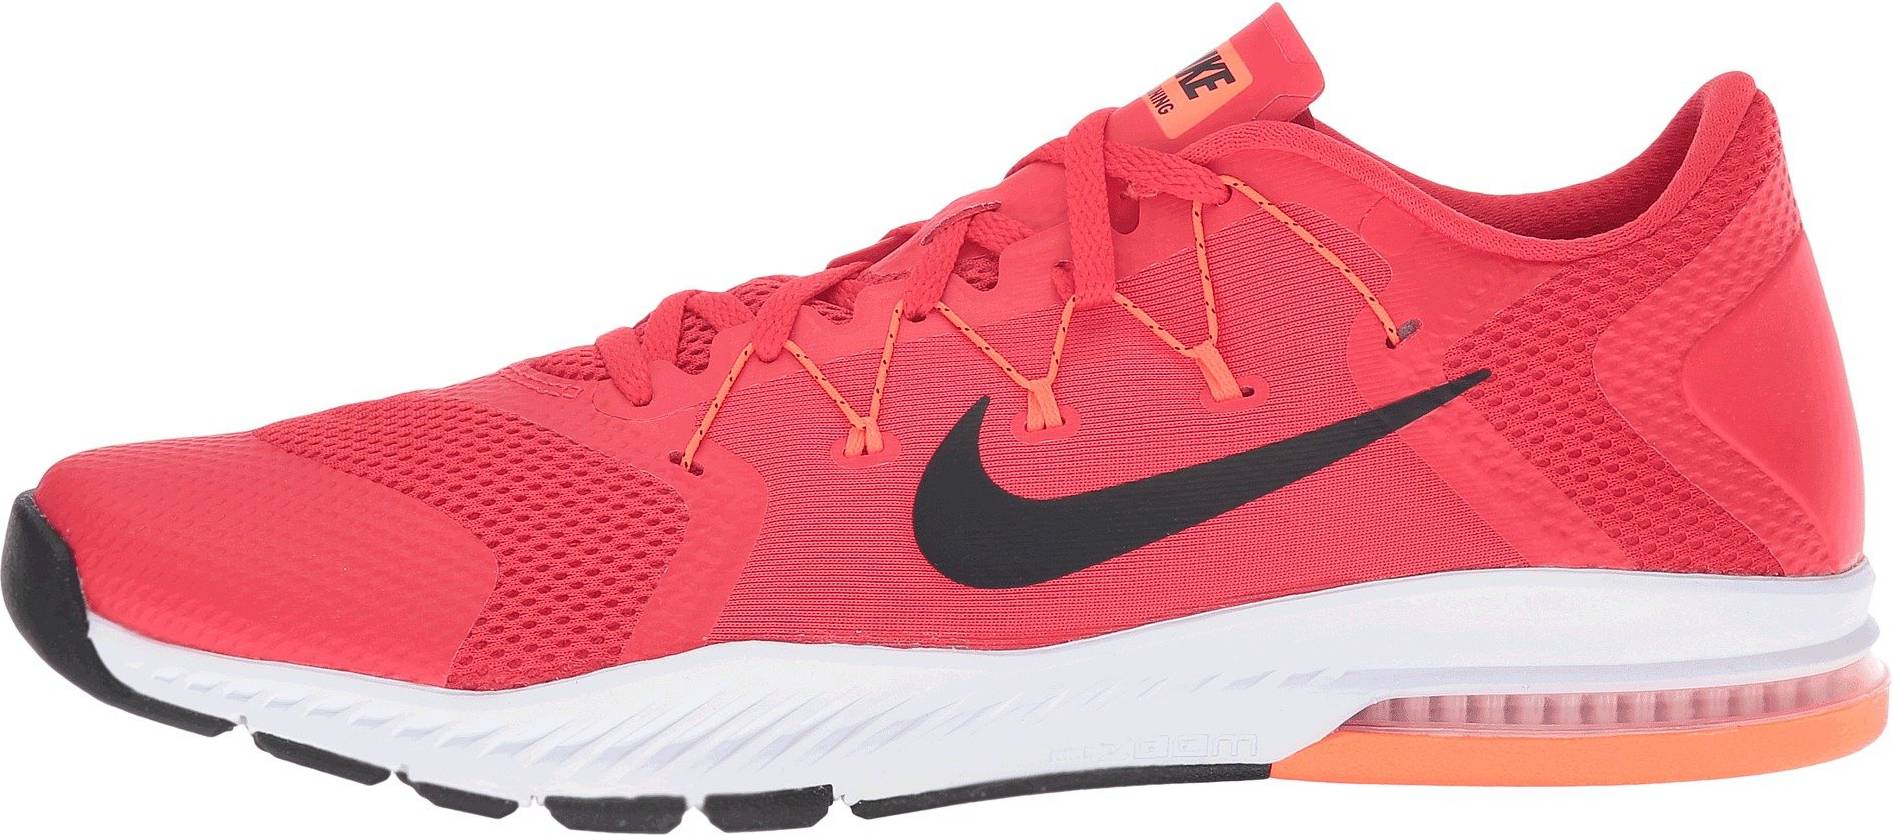 Nike Zoom Train Complete - Deals ($82), Facts, Reviews (2021 ...